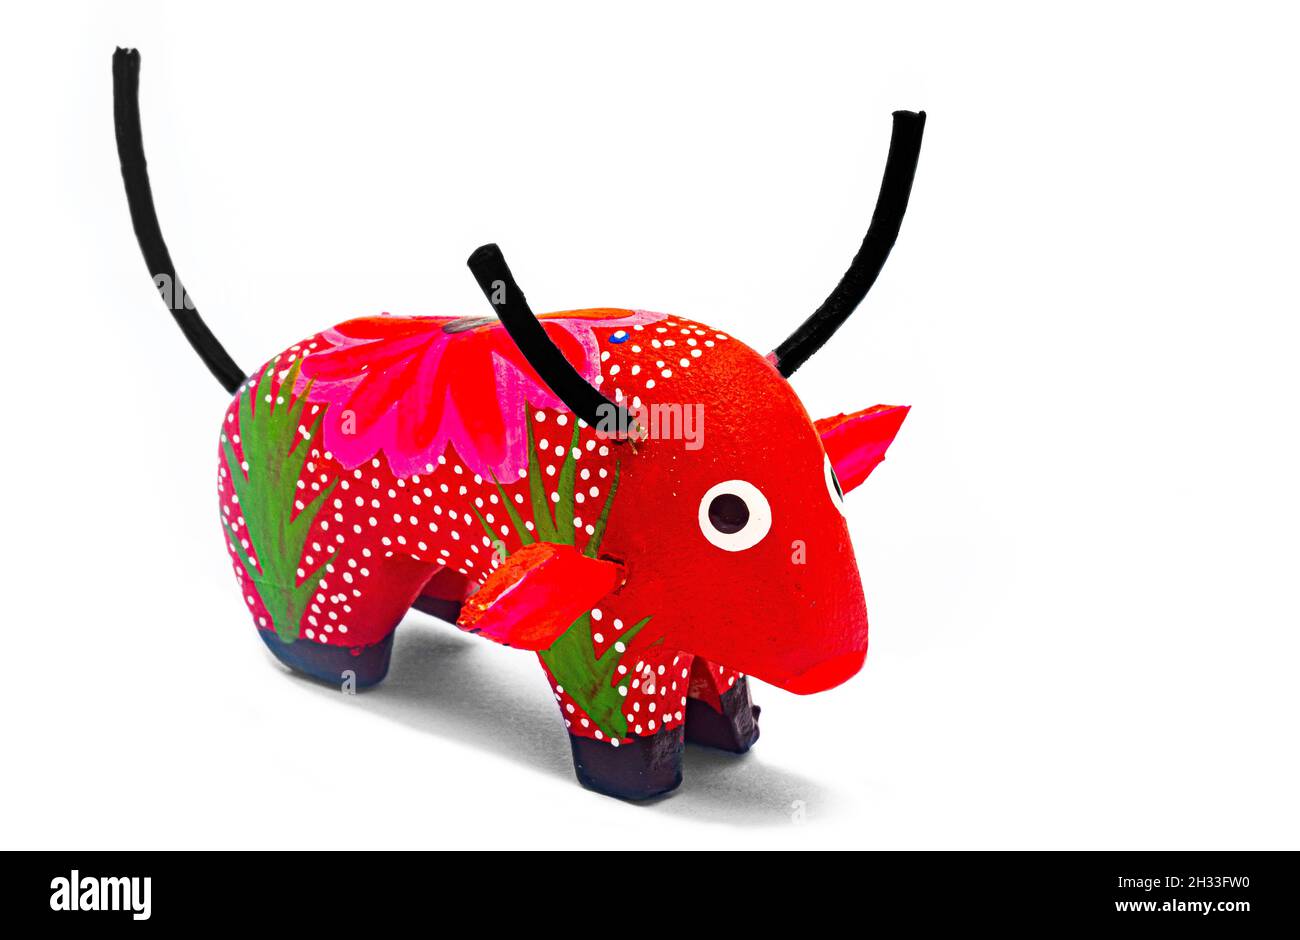 Fantastic and colorful bull alebrije from Mexico Stock Photo